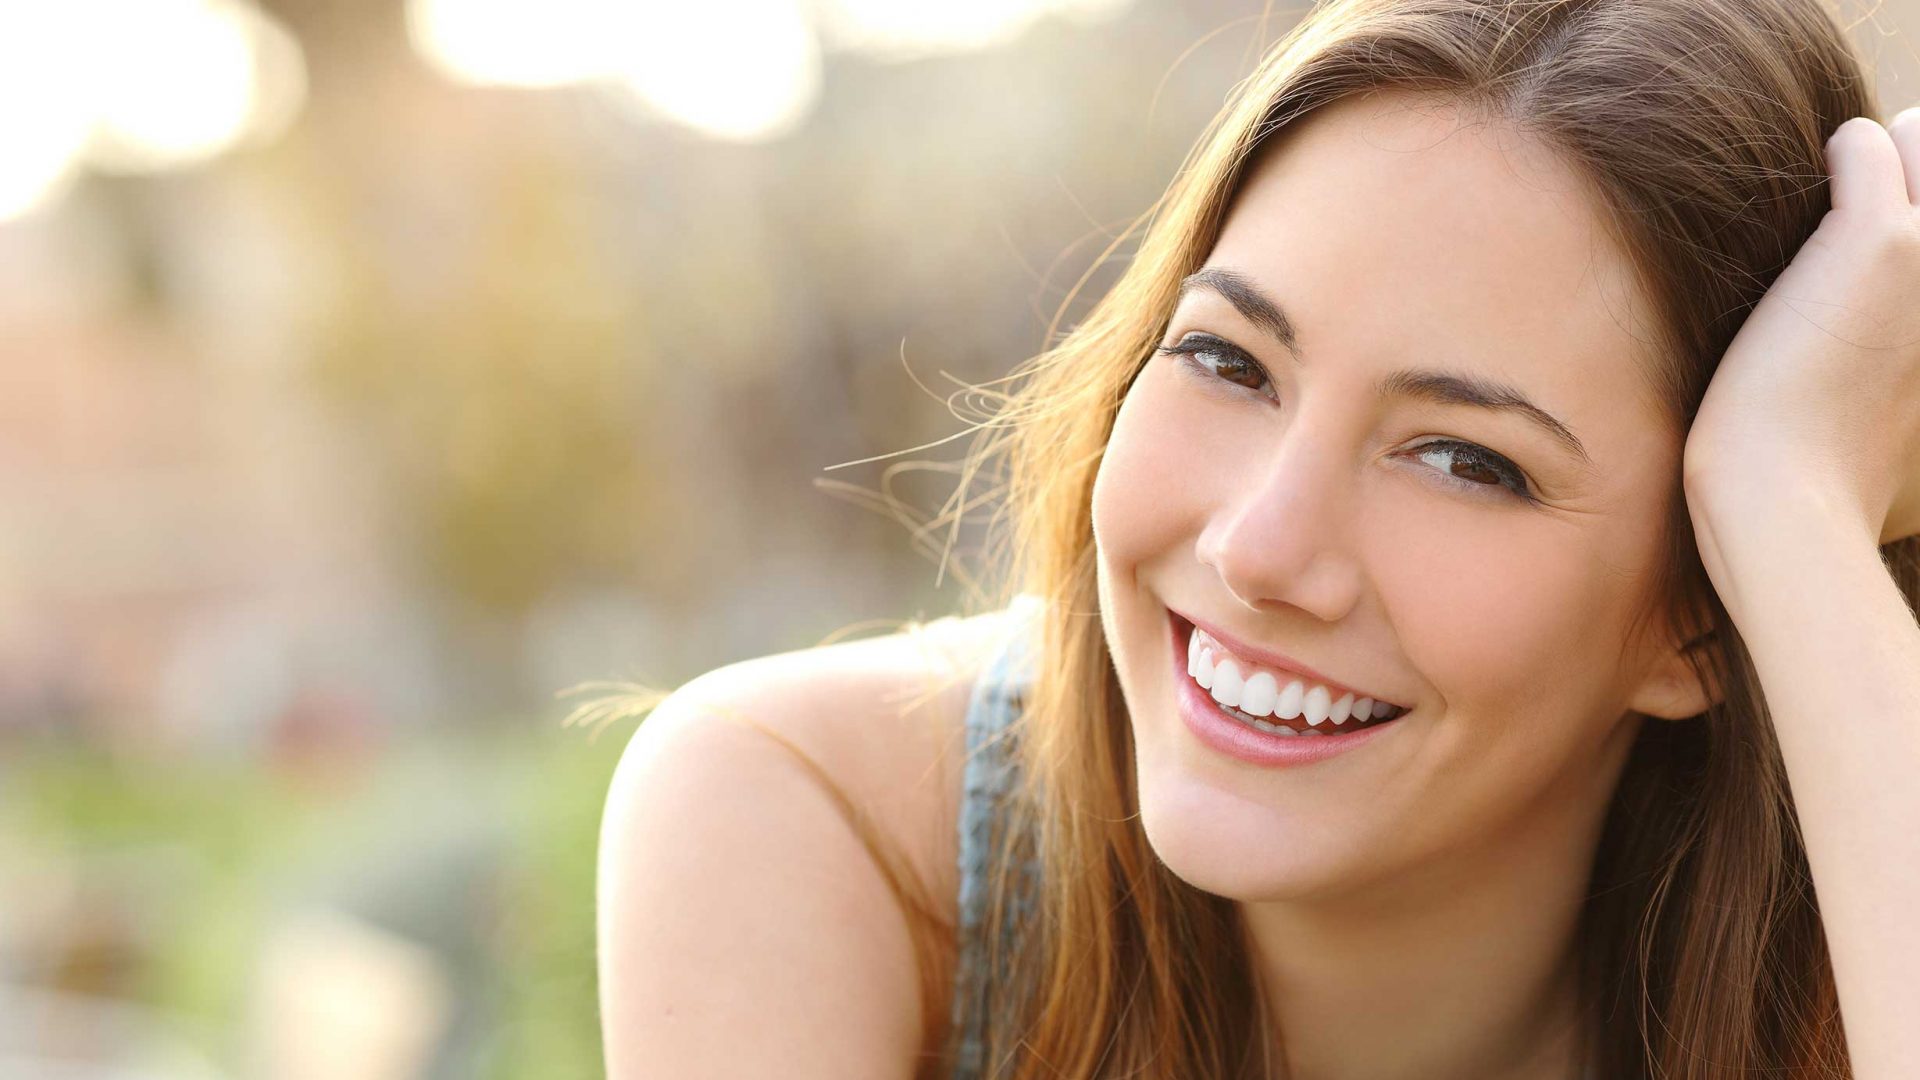 Is Cosmetic Dentistry Right For You